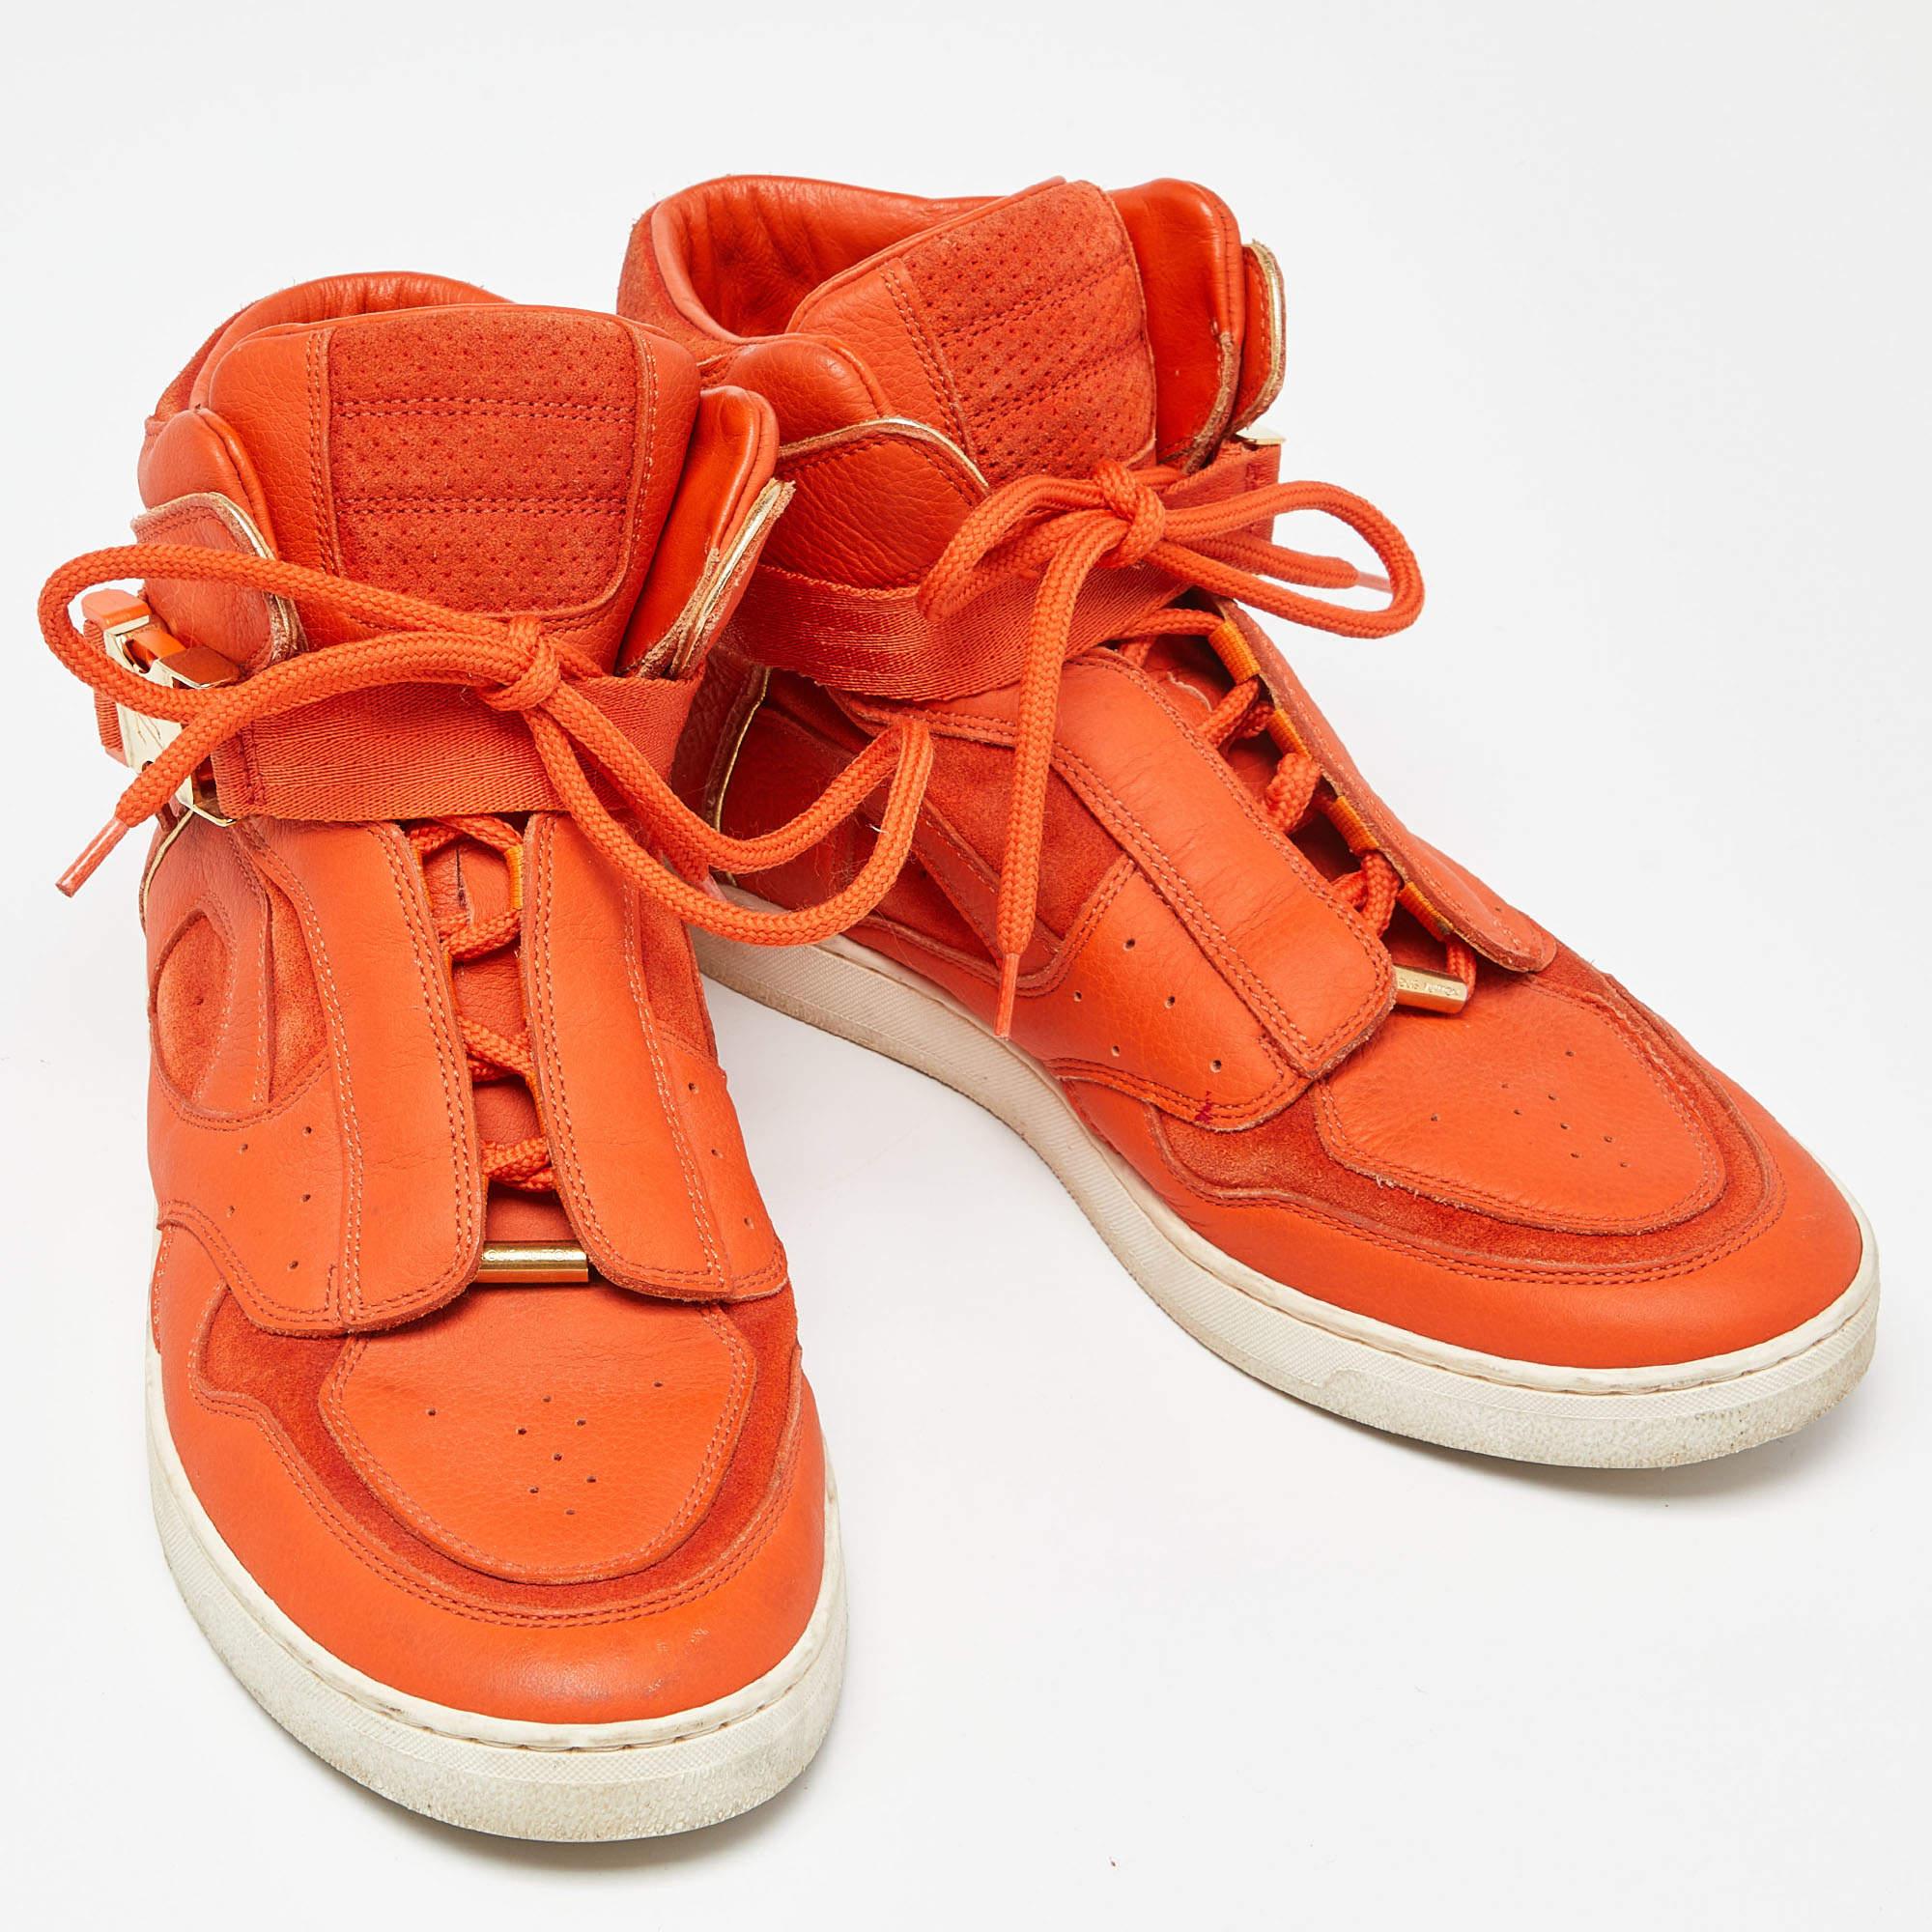 Louis Vuitton Orange Leather and Suede Slipstream High Top Sneakers Size 36 For Sale 1